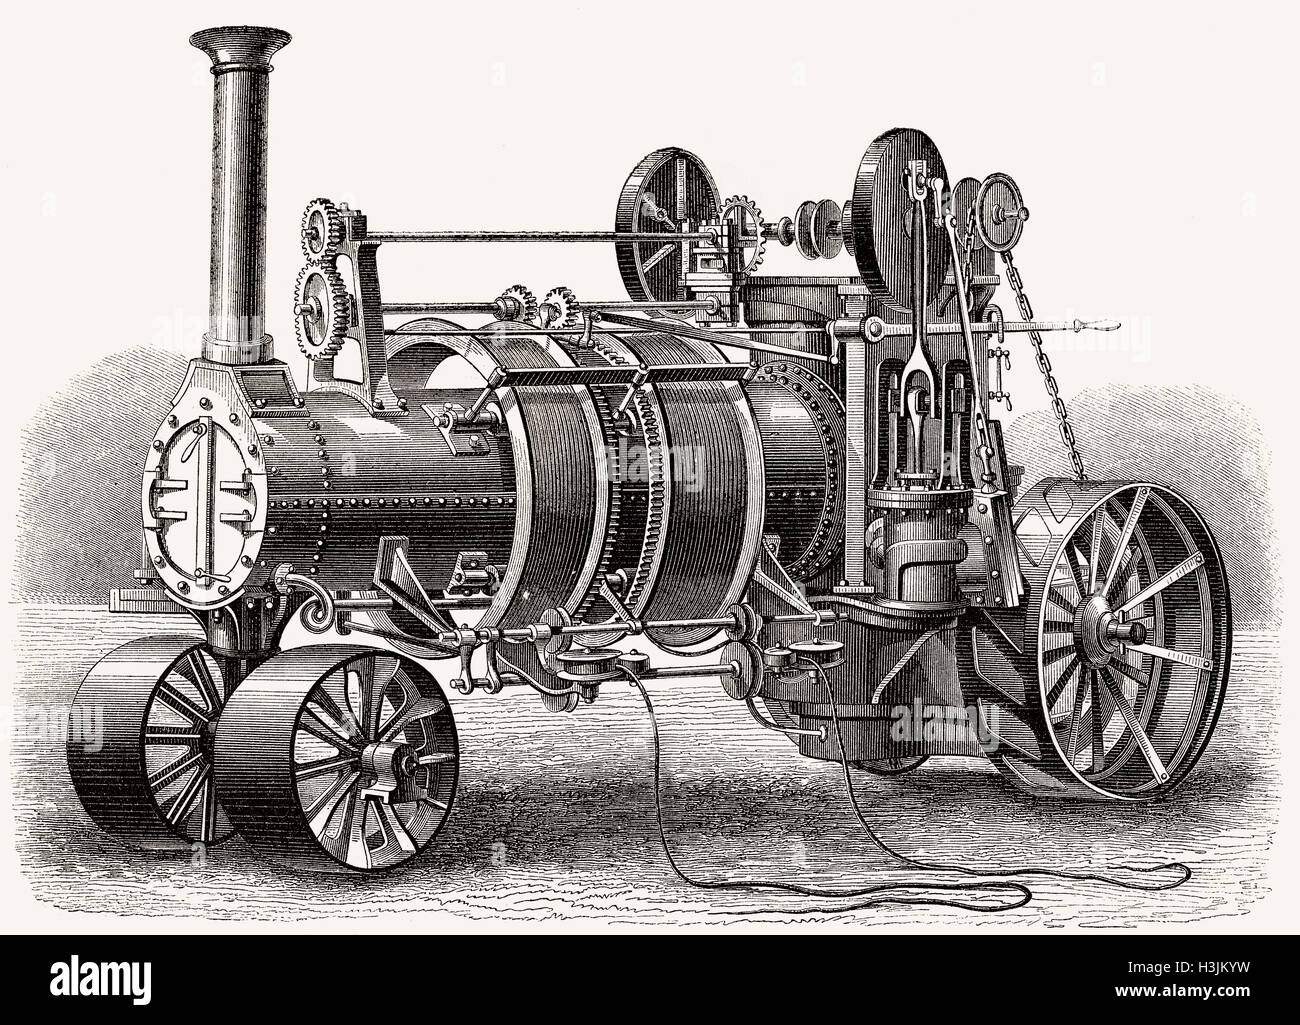 Machine steam plough systems at work, agricultural tractor powered by a steam engine, 19th Century Stock Photo